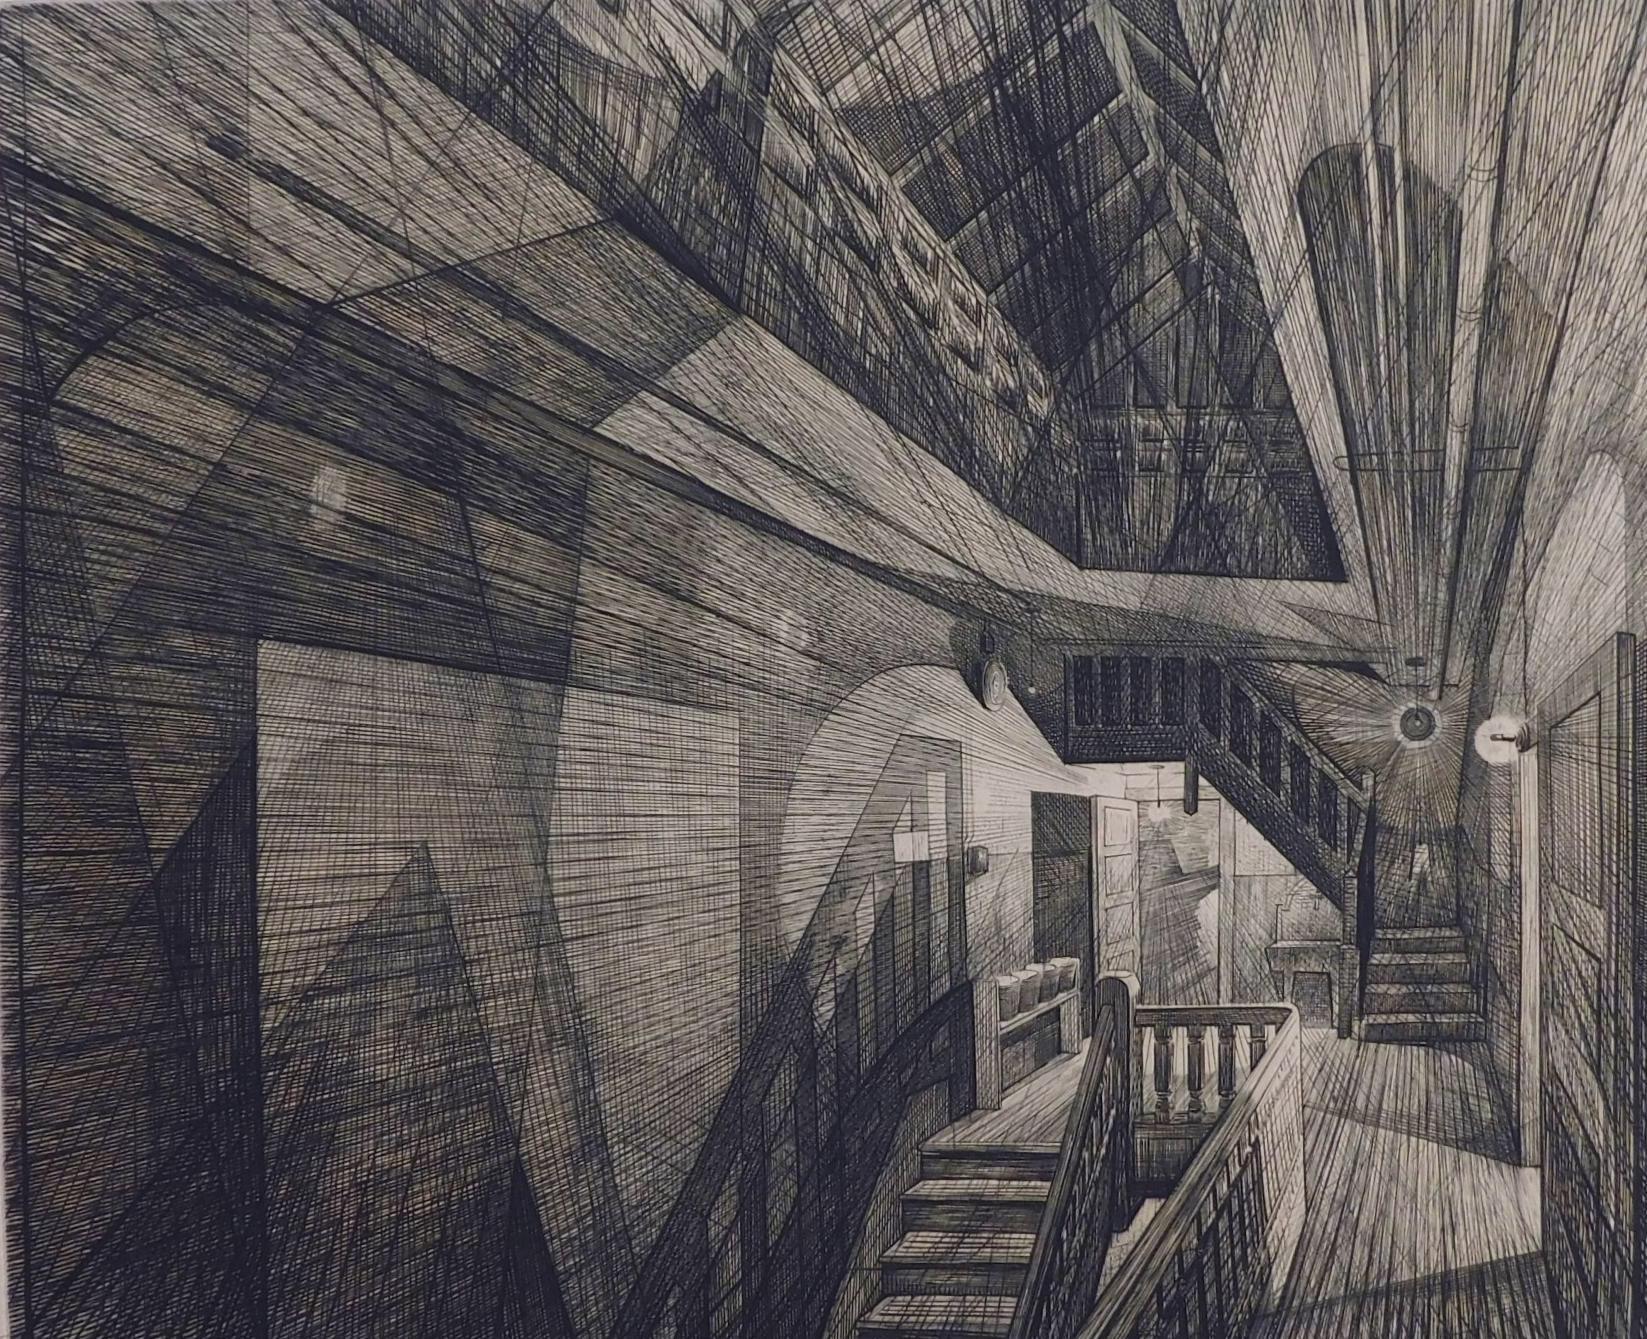 Drypoint and engraving by Wisconsin born printmaker Armin Landeck (1905-1984).
Titled “Stairhall.” Pencil signed lower right. Full margins.
The image measures 11 7/8